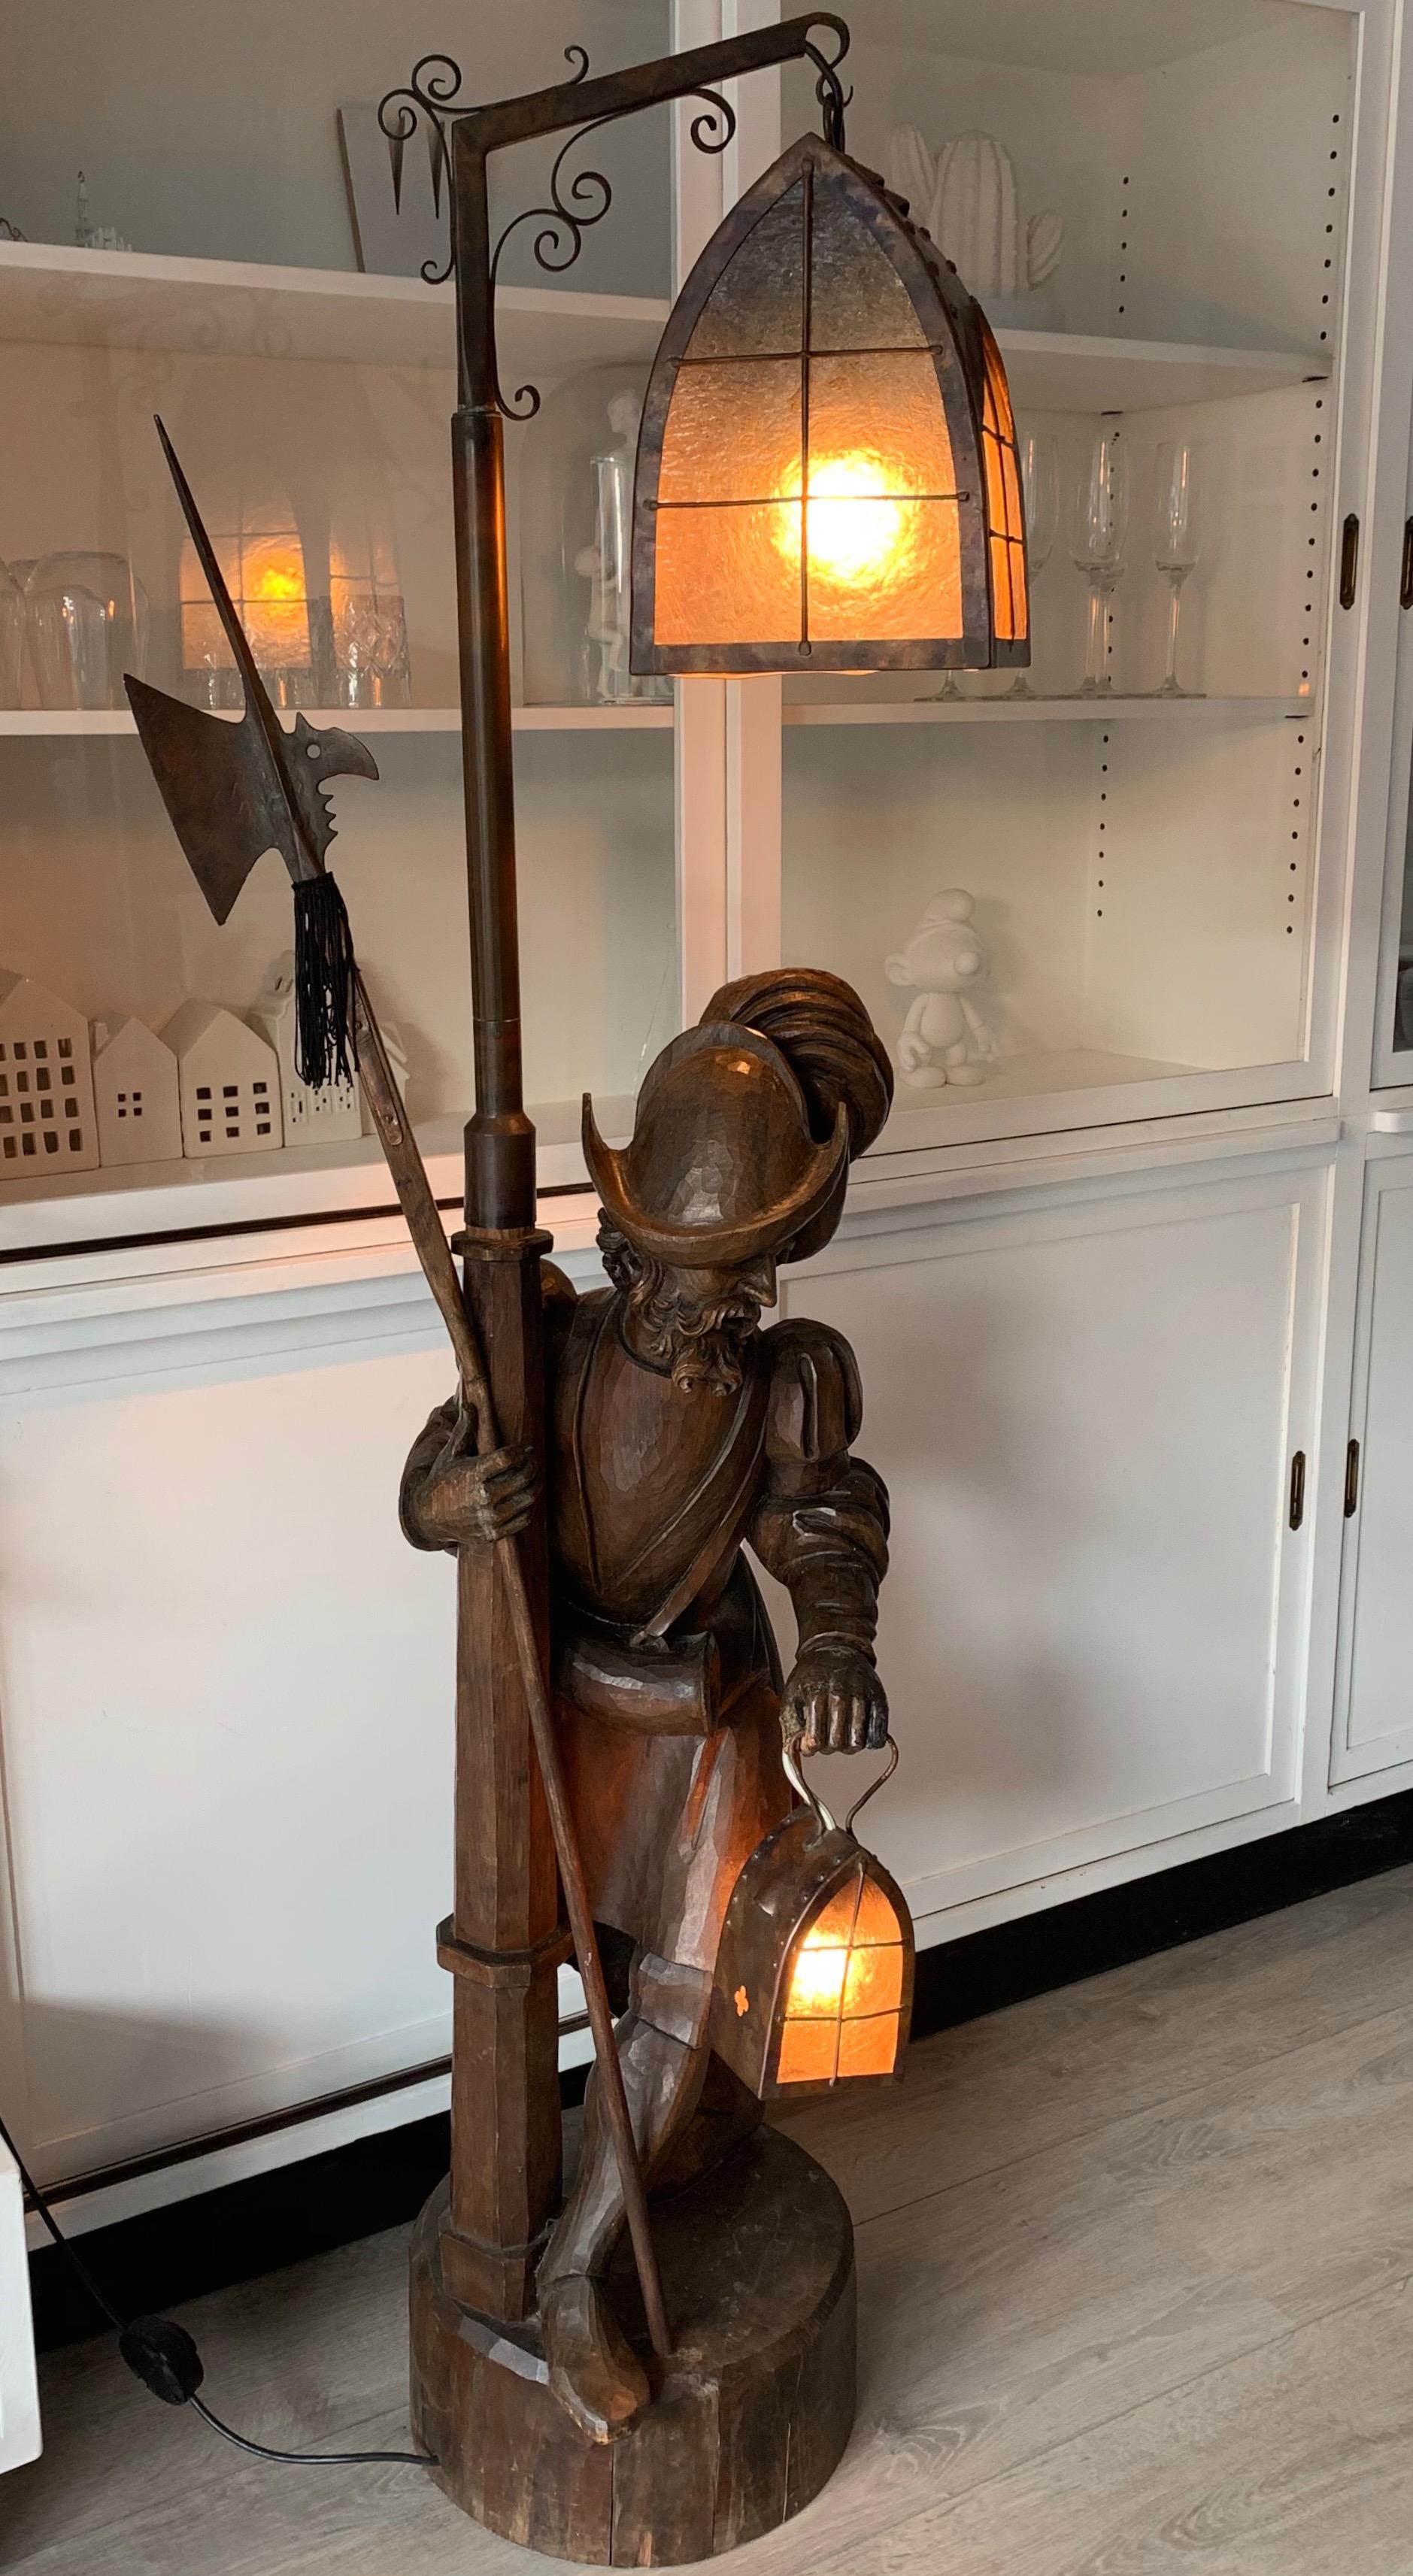 Large and beautifully sculptured, floor lamp.

If you are looking for unique and decorative antiques to bring joy and class to your interior then this marvelous, sculptural floor lamp could be perfect for you. Finding an antique and all hand-carved